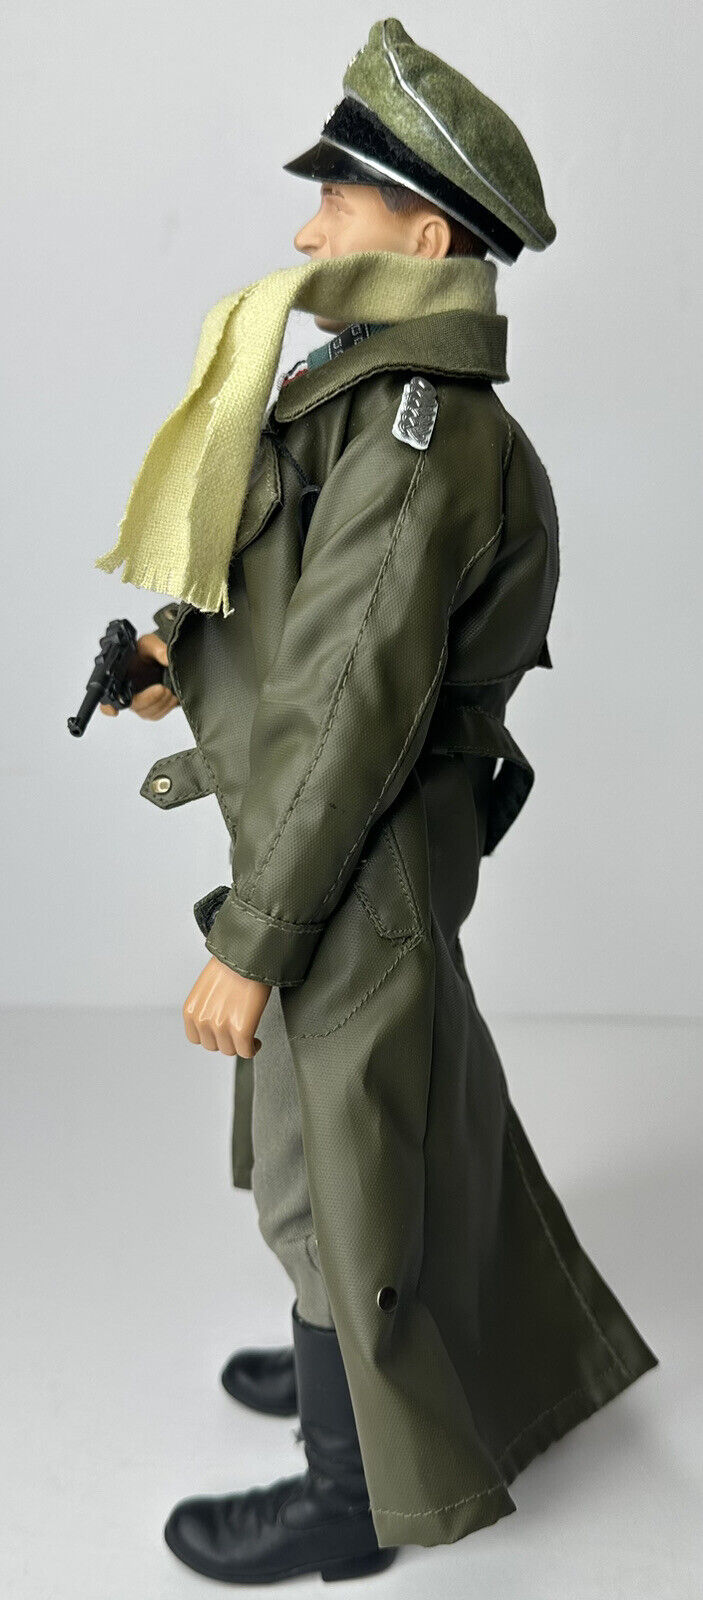 1999 Dragon WWII German SS Officer Kurt Meyer 12" Action Figure - Highly Detailed Collectible with Binoculars and Trench Coat - TreasuTiques